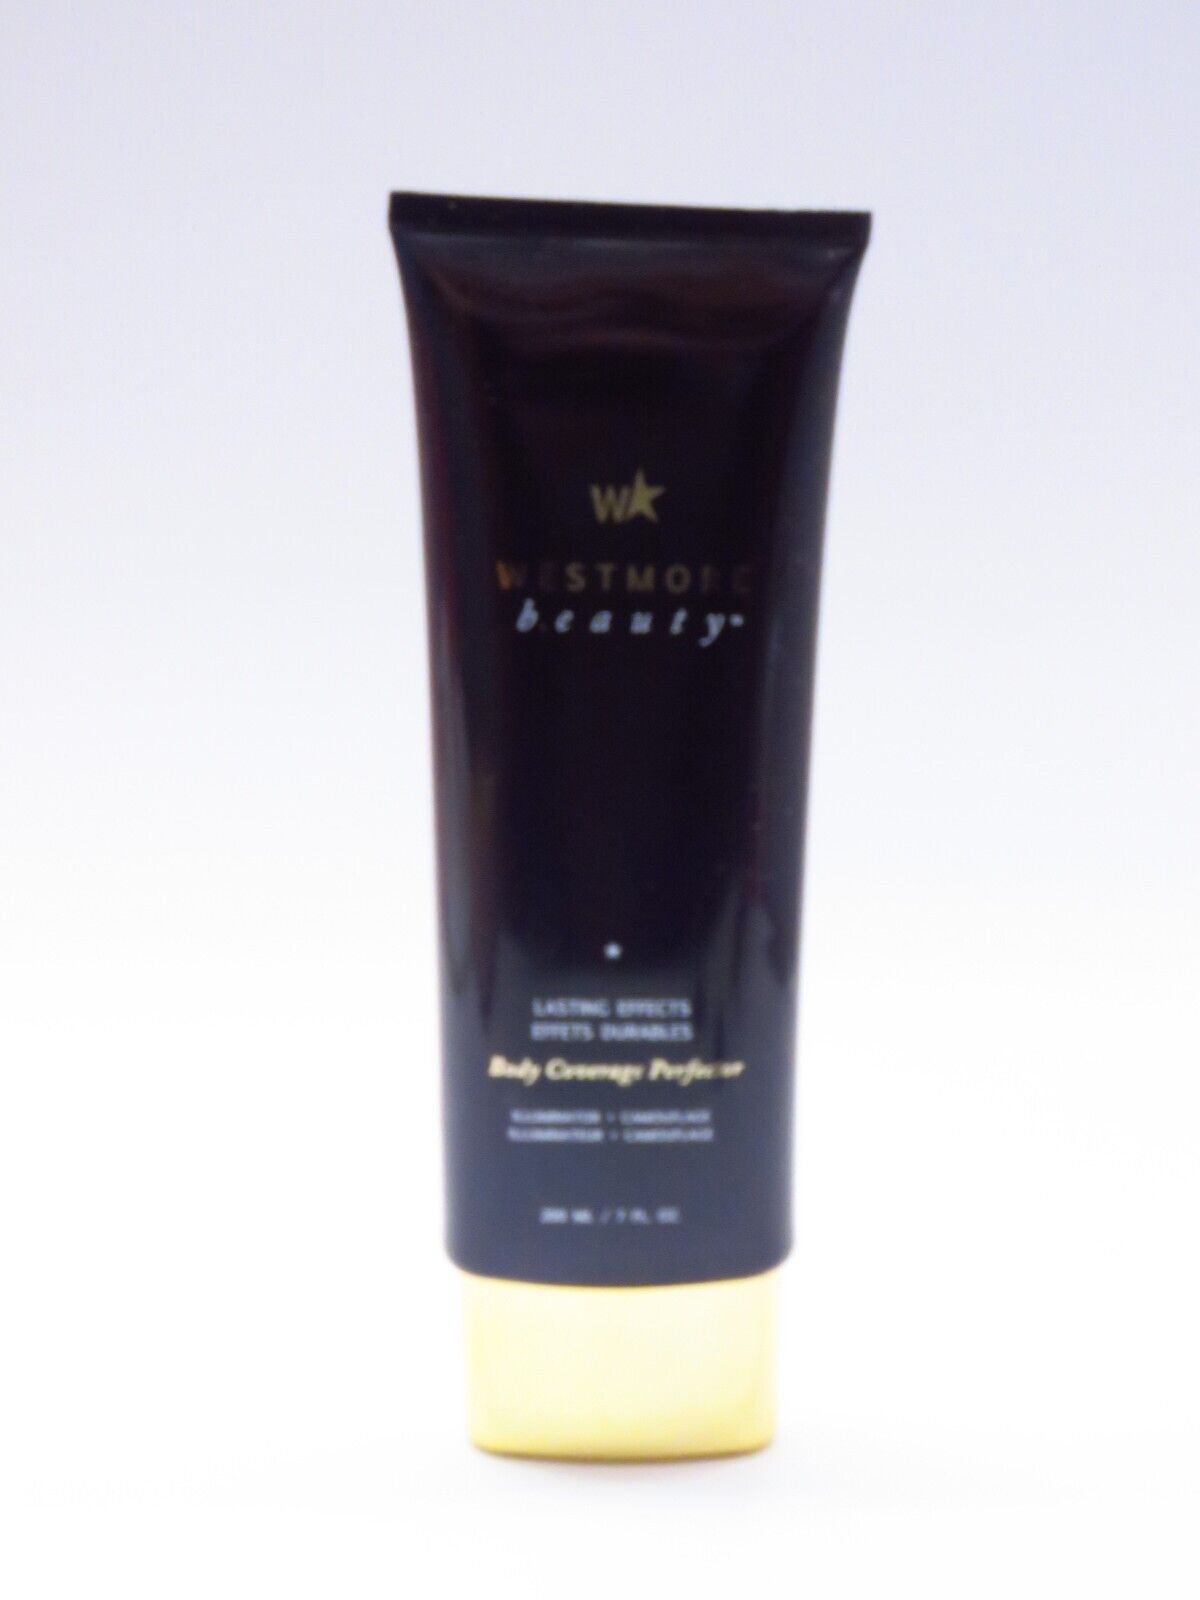 Westmore Beauty Lasting Effects Body Coverage Perfector 7 oz Natural Radiance WESTMORE BEAUTY